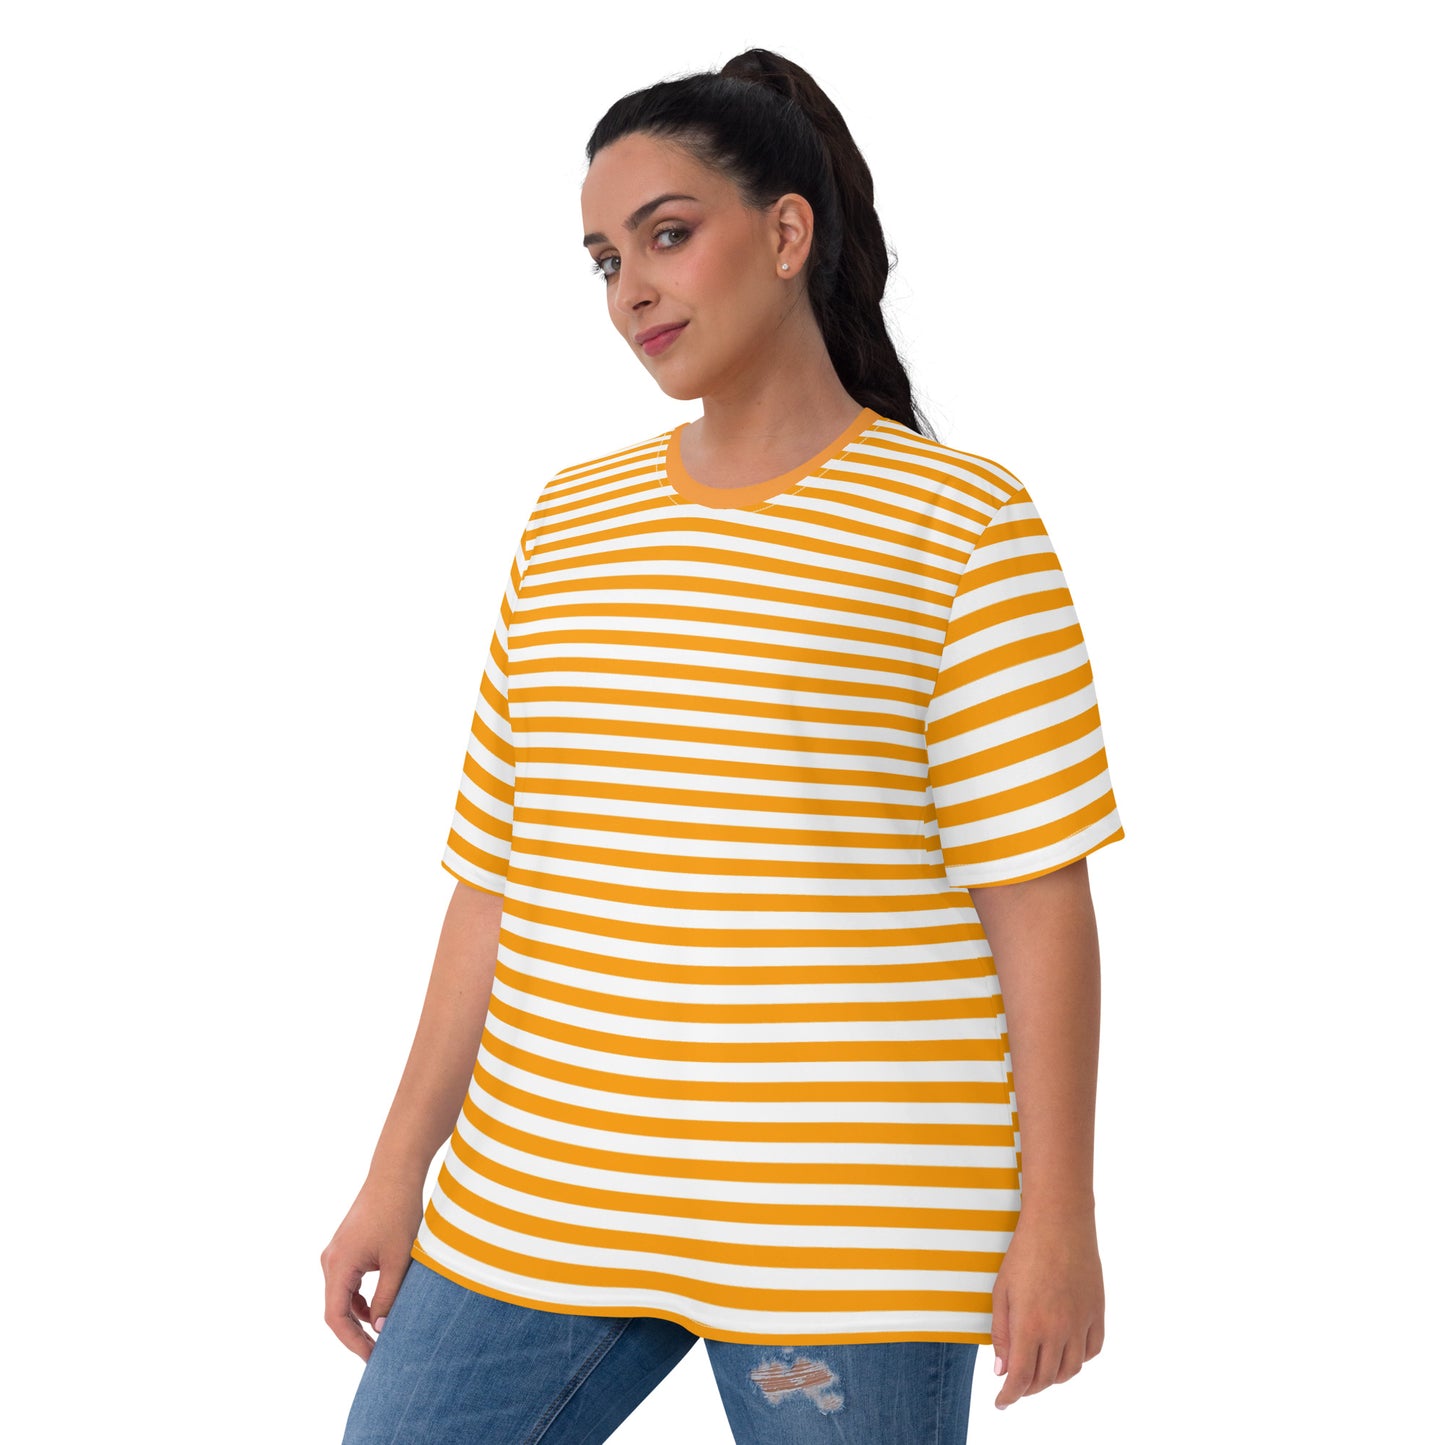 Orange and white striped t-shirt that is a must-have for any woman's wardrobe